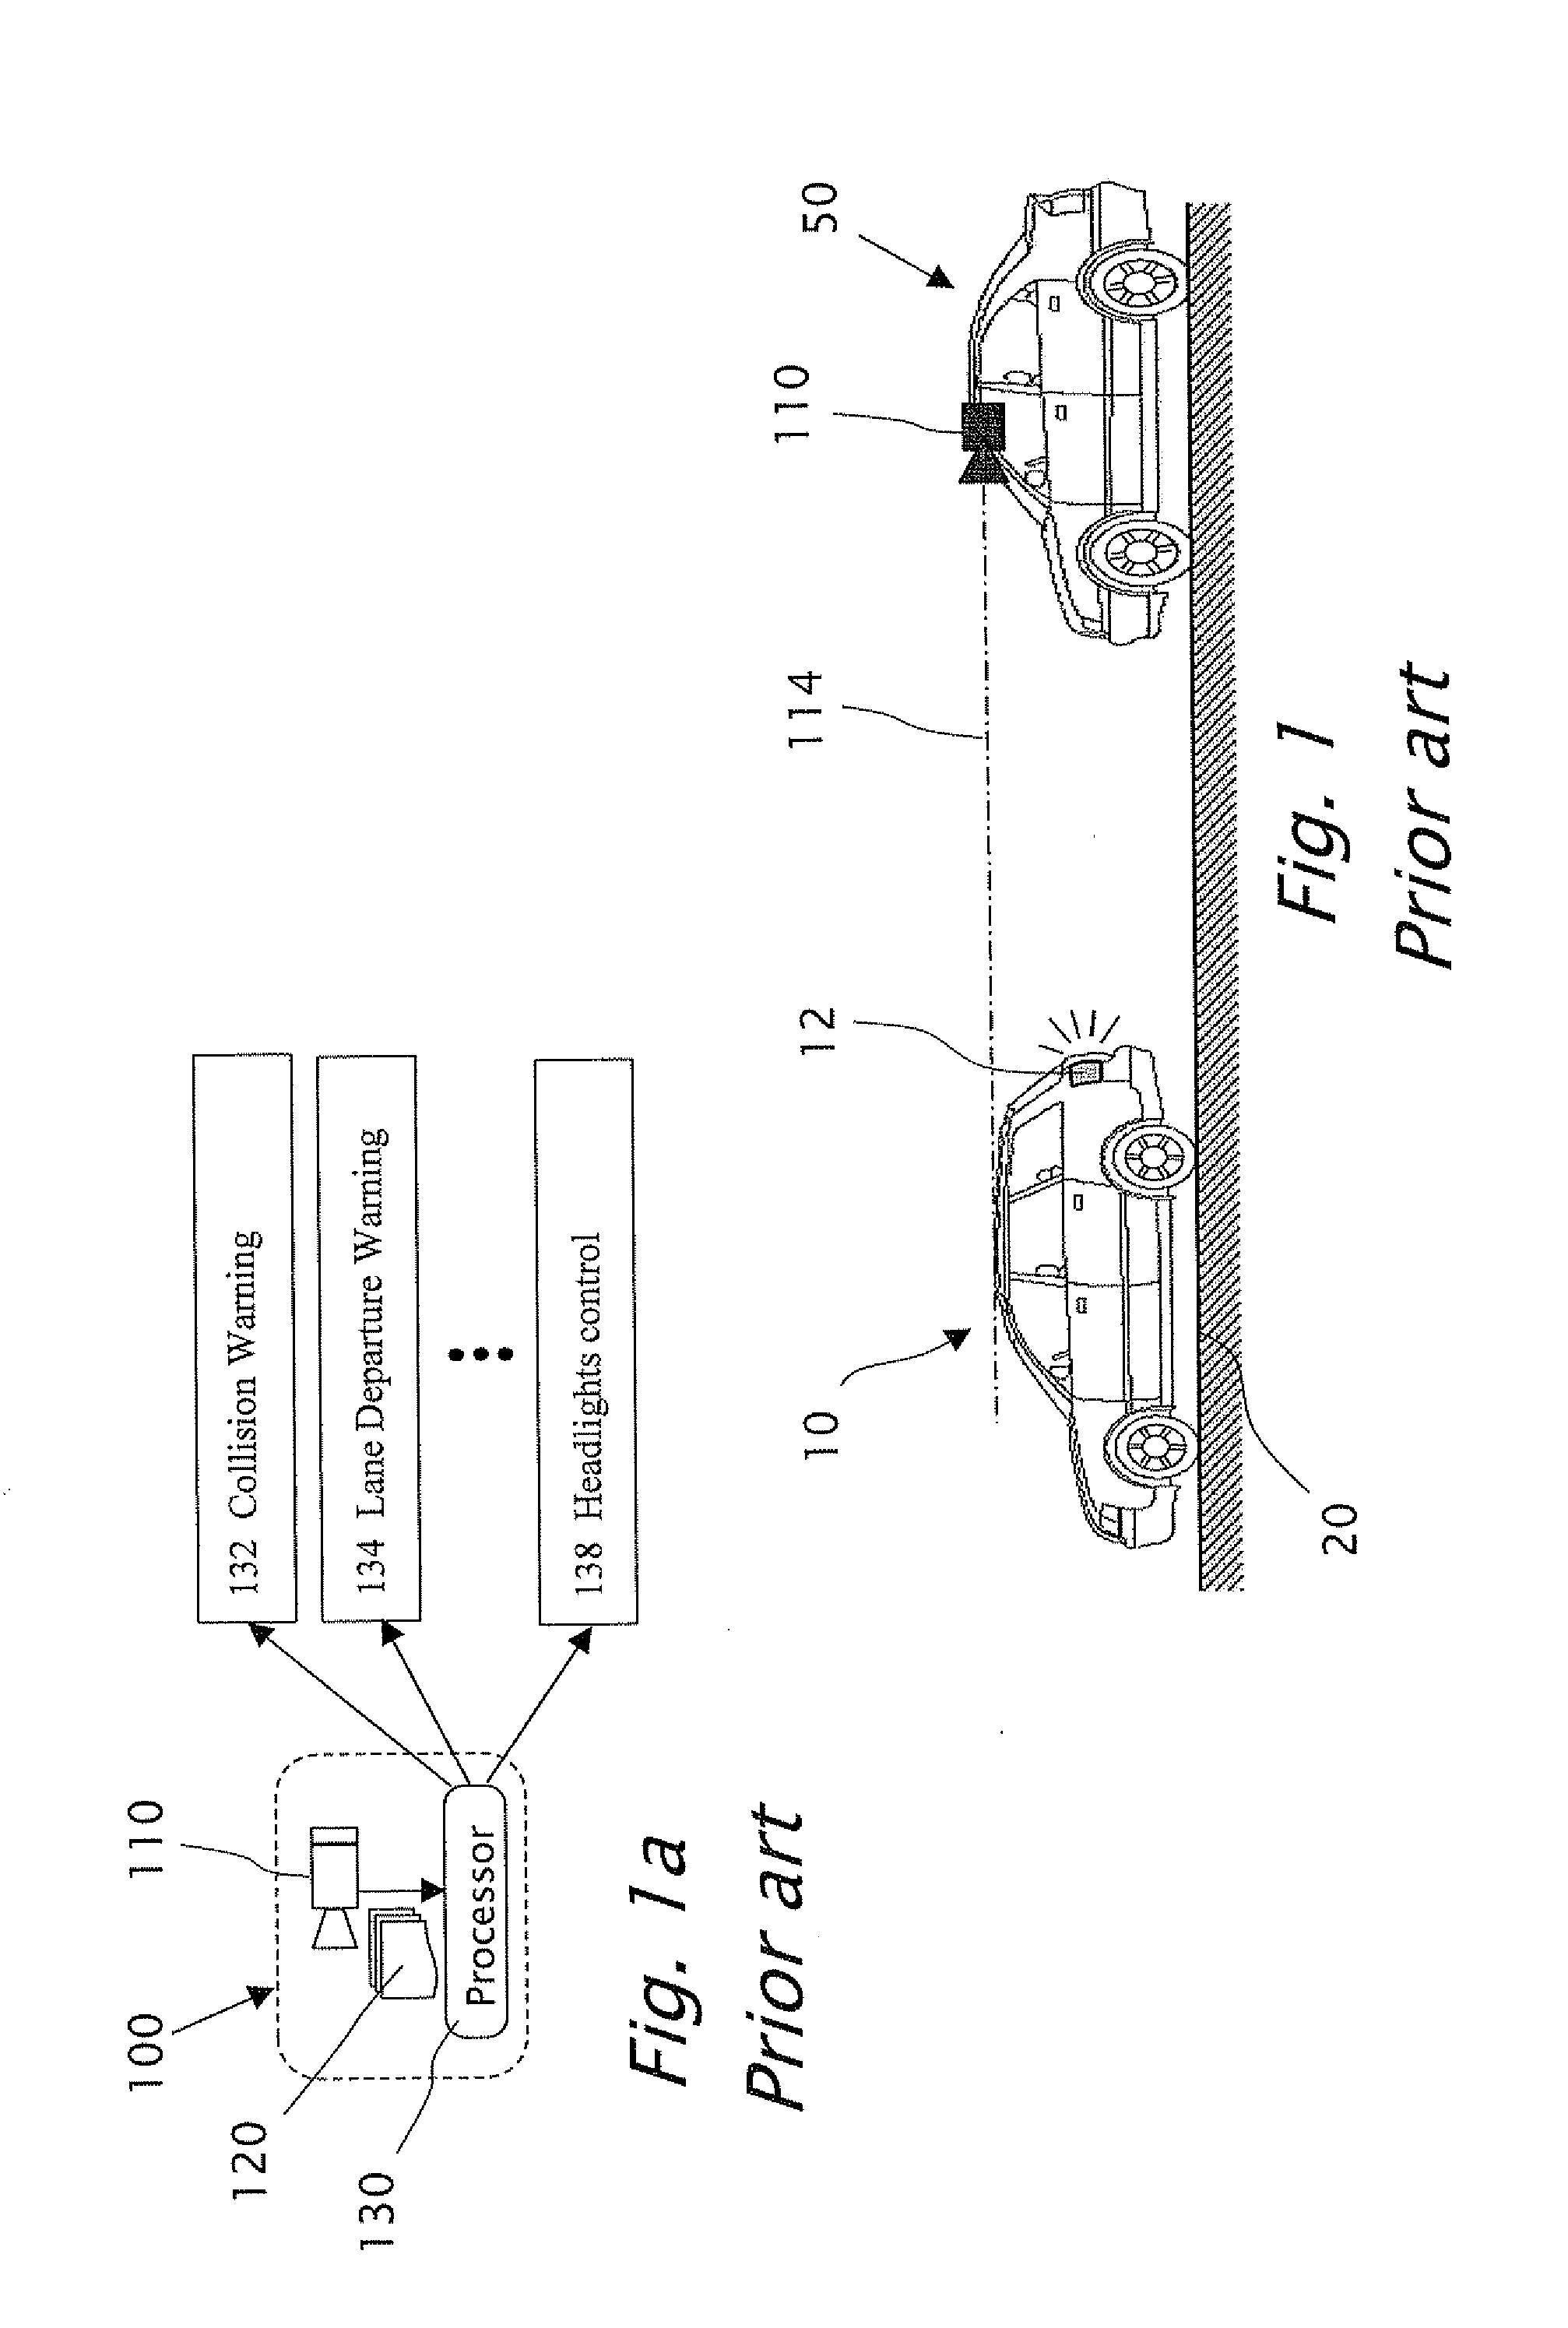 Symmetric filter patterns for enhanced performance of single and concurrent driver assistance applications